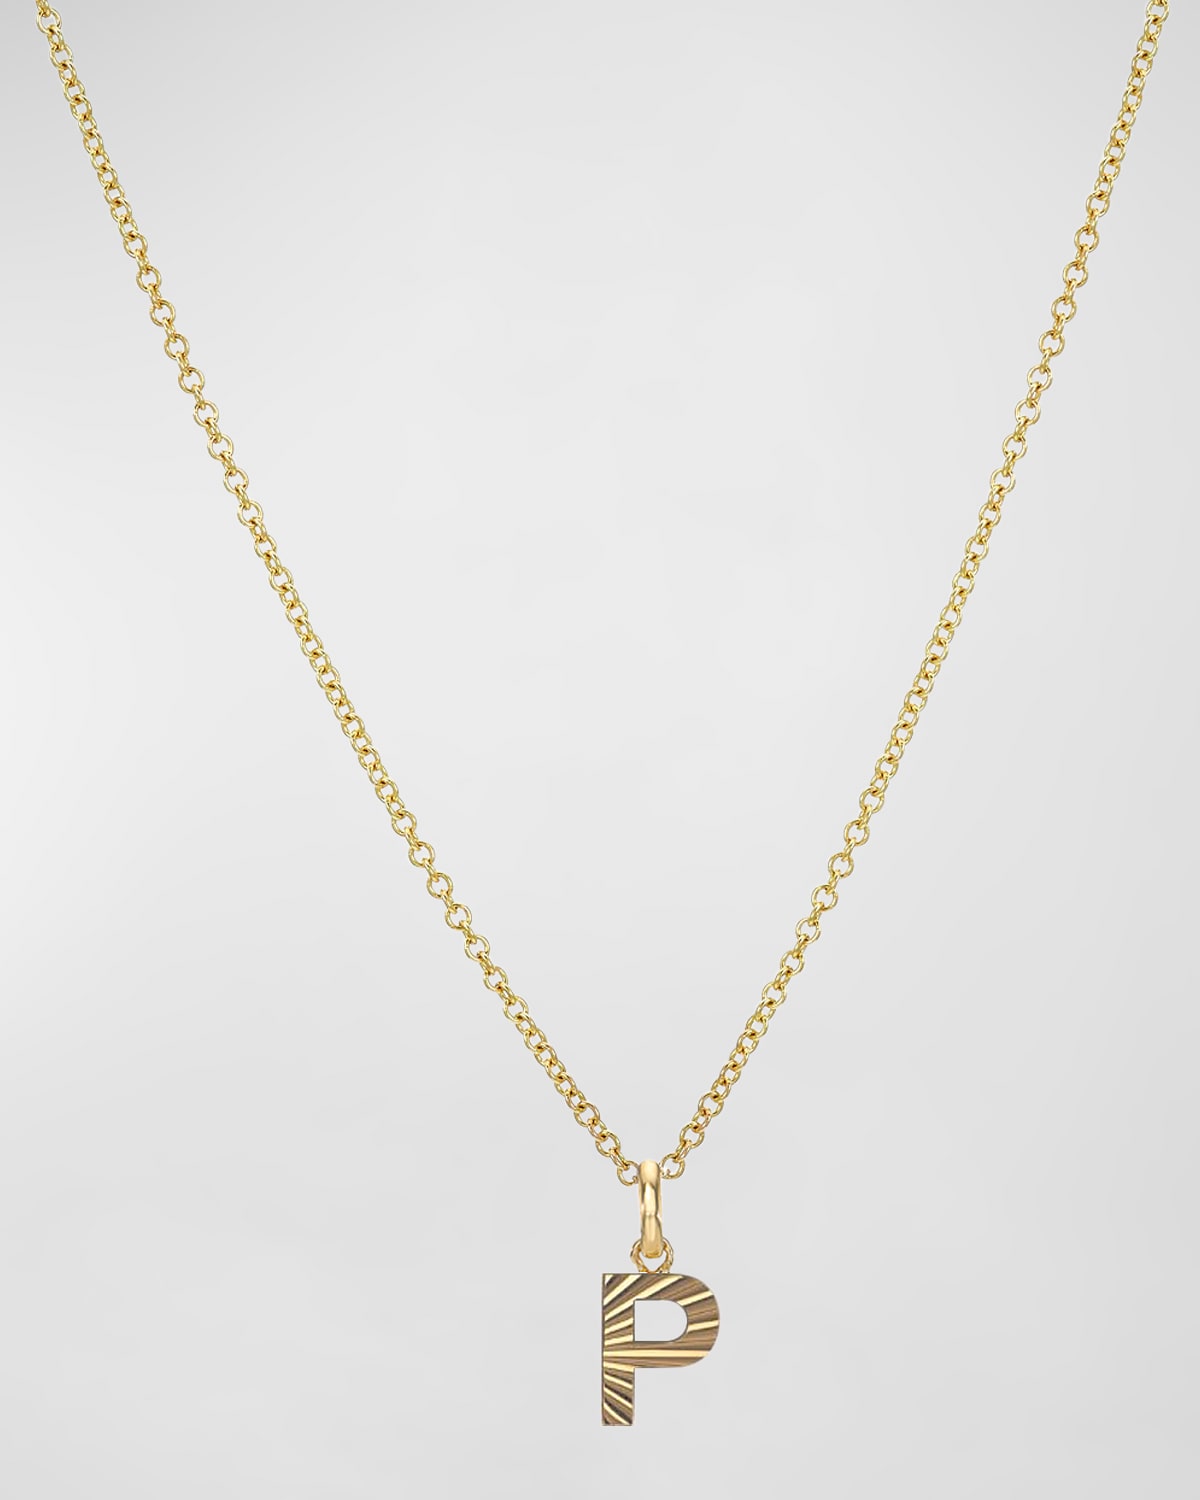 Zoe Lev Jewelry 14k Gold Initial Pendant Necklace